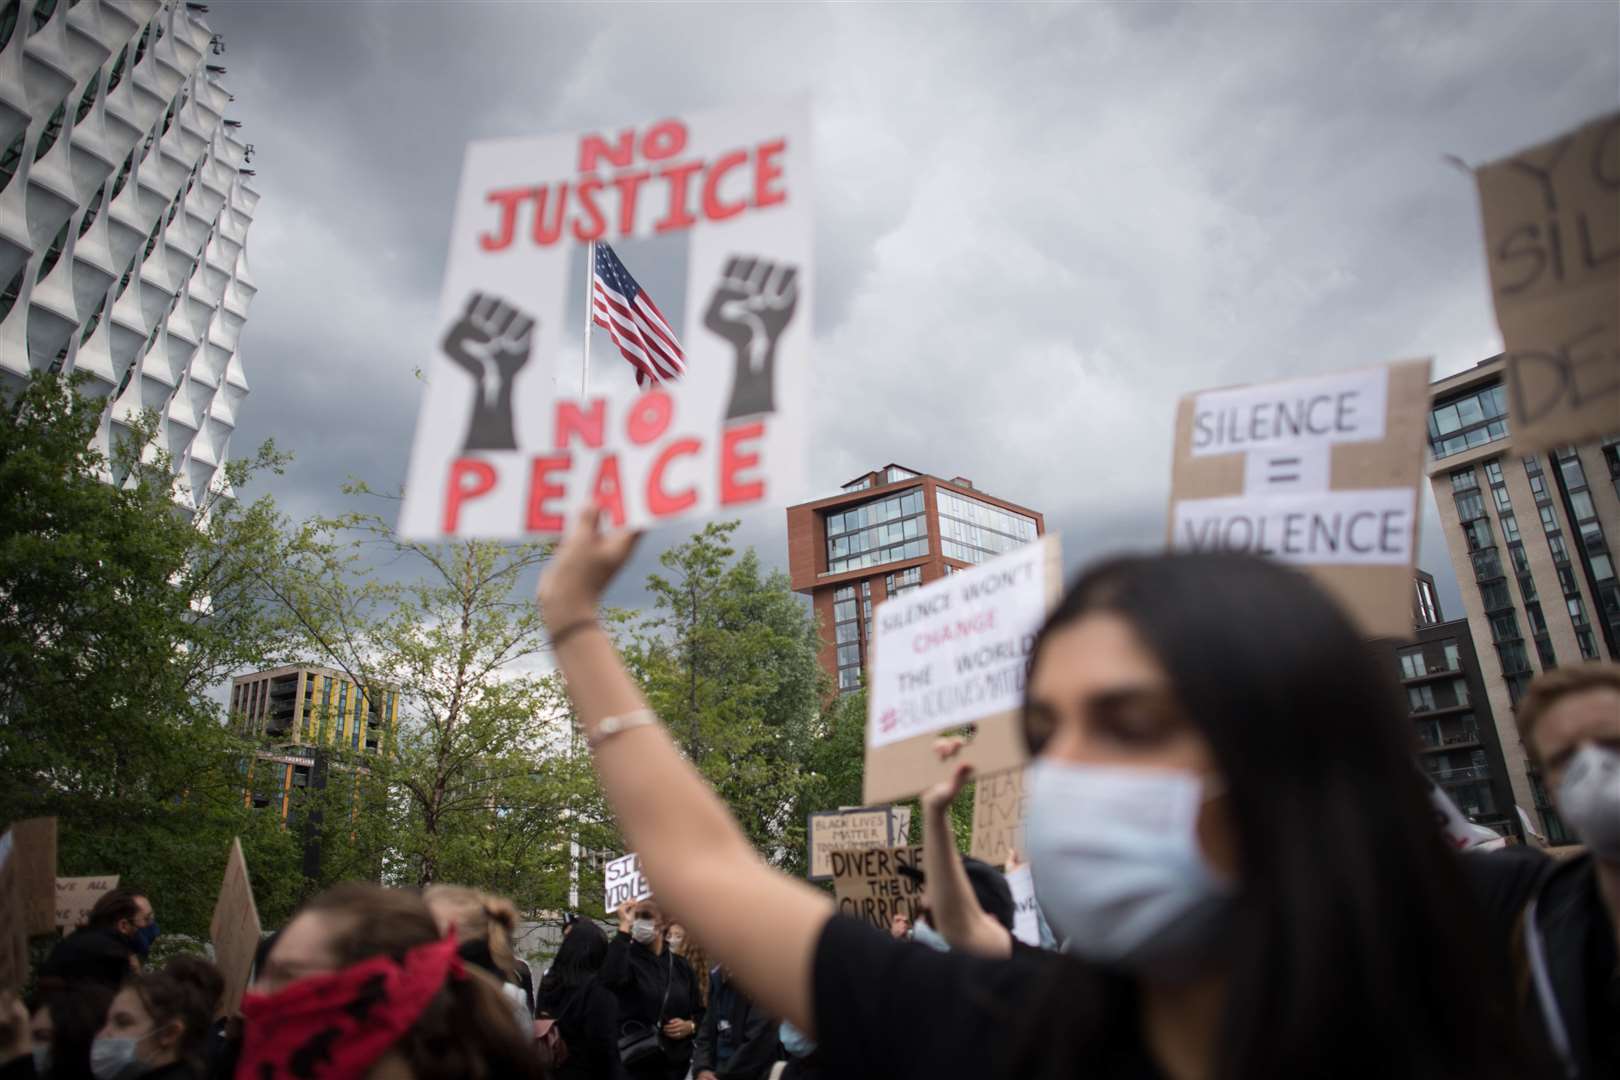 Demonstrators at a Black Lives Matter protest rally at the US embassy in London (Stefan Rousseau/PA)